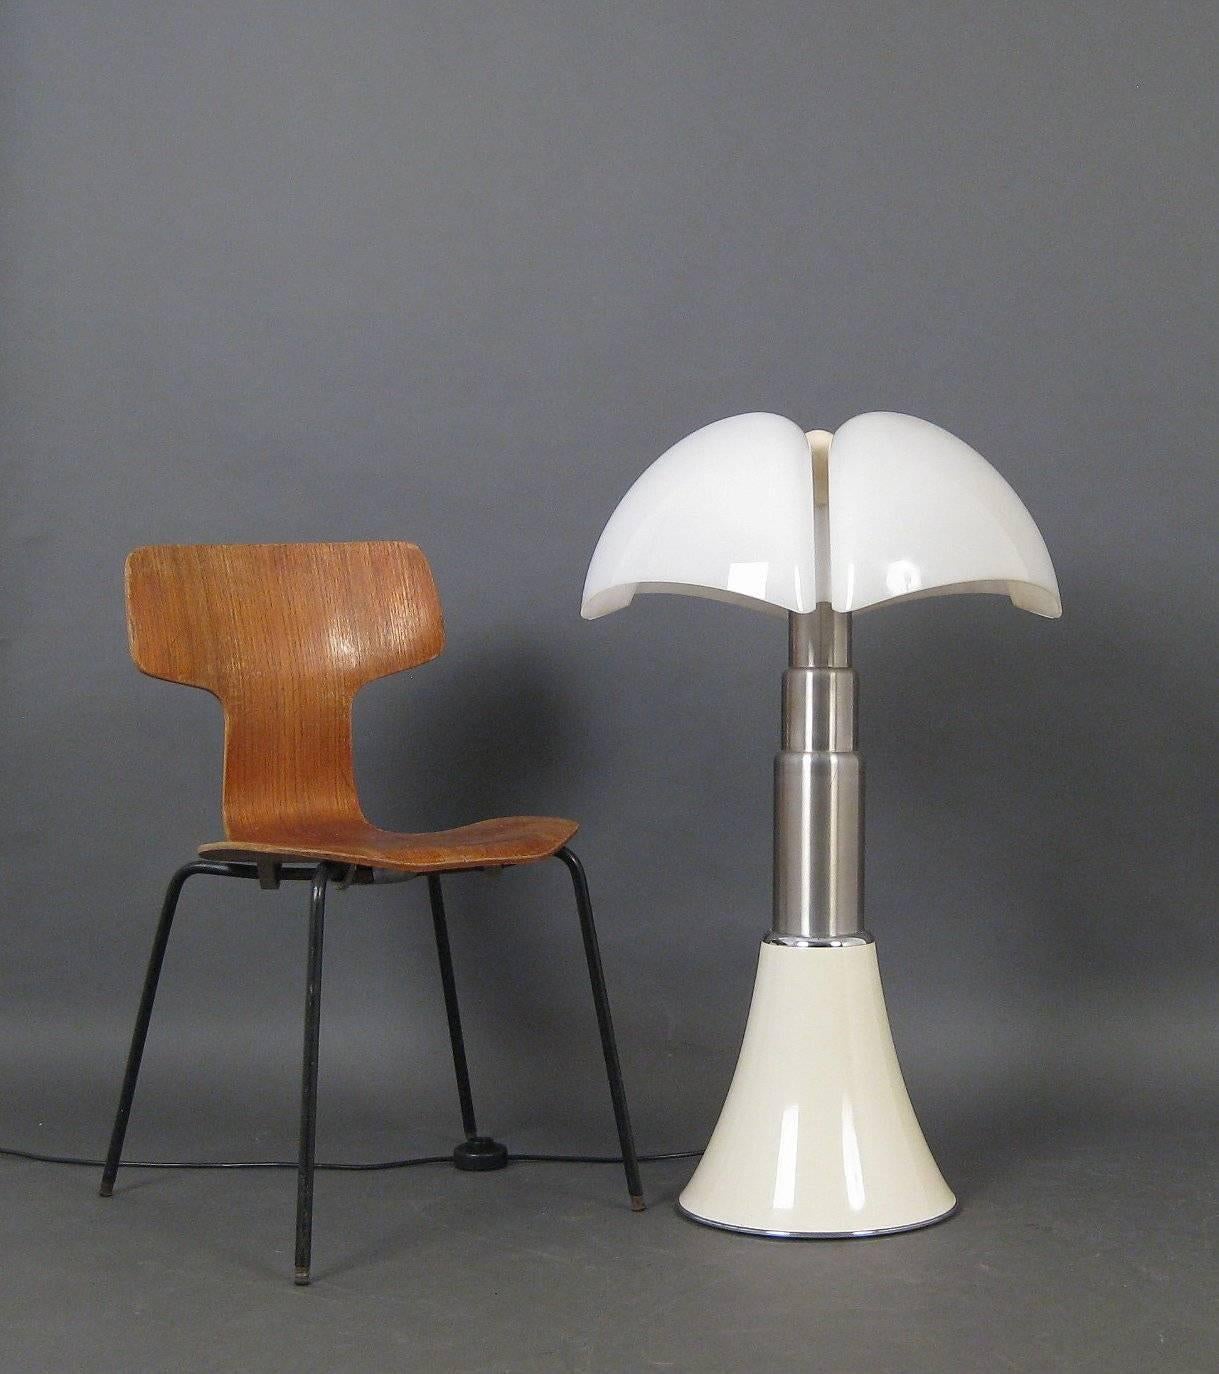 A fine original lamp in the larger, white base version, telescopic height adjustable by Gae Aulenti for Martinelli Luce, Italy.
The lamp is 54cm across the shade and height is adjustable between 72-90 cm.